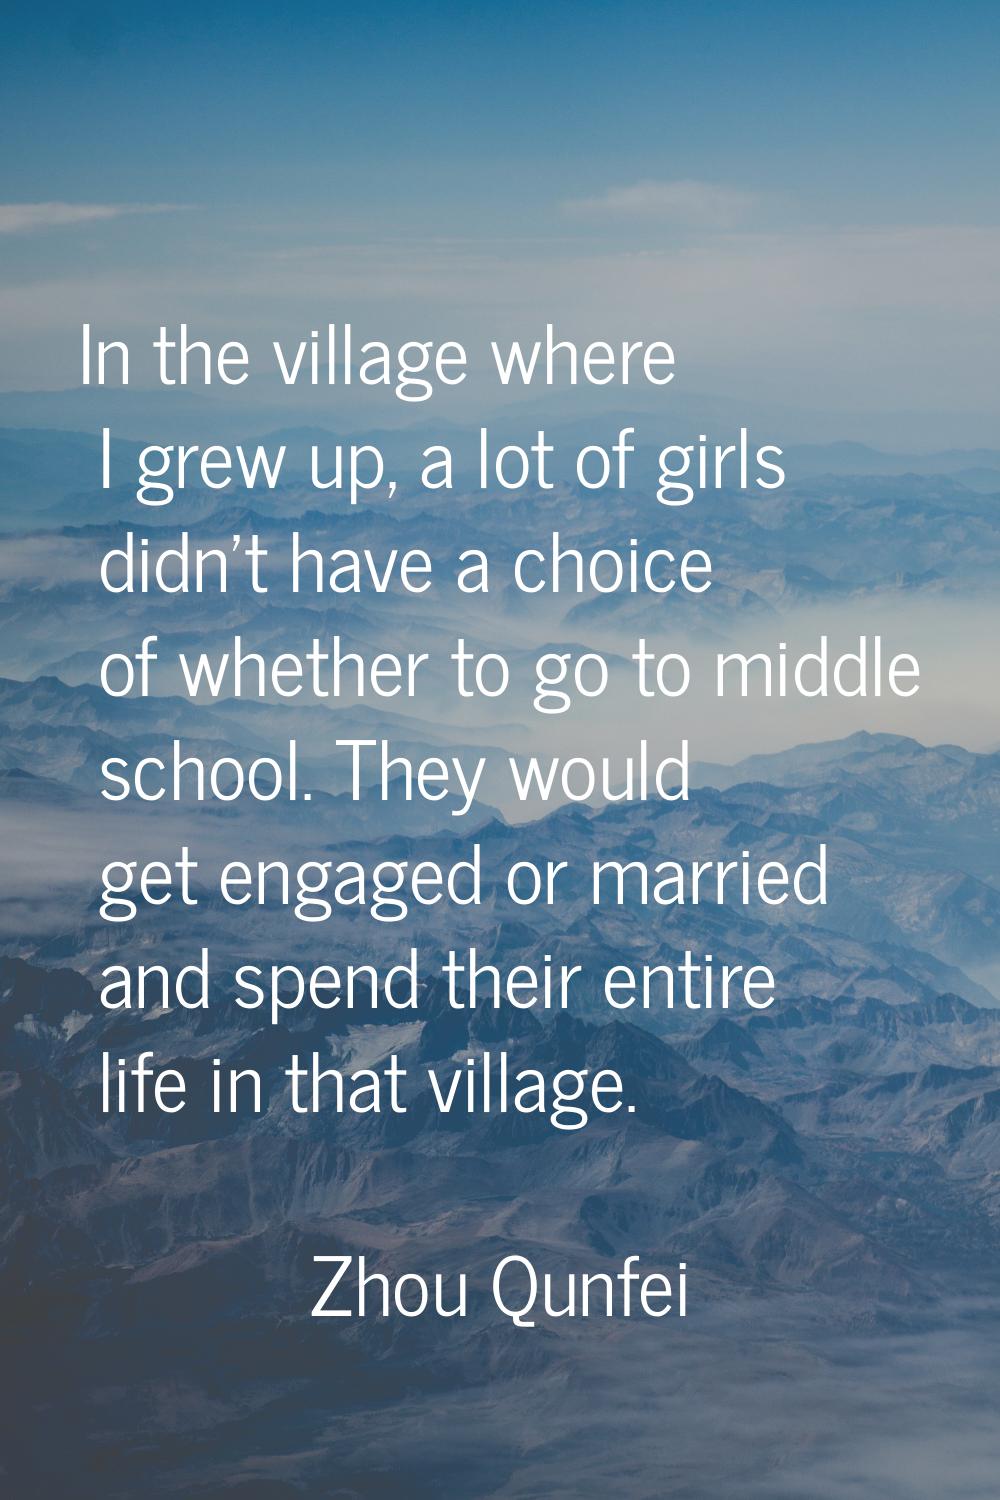 In the village where I grew up, a lot of girls didn't have a choice of whether to go to middle scho